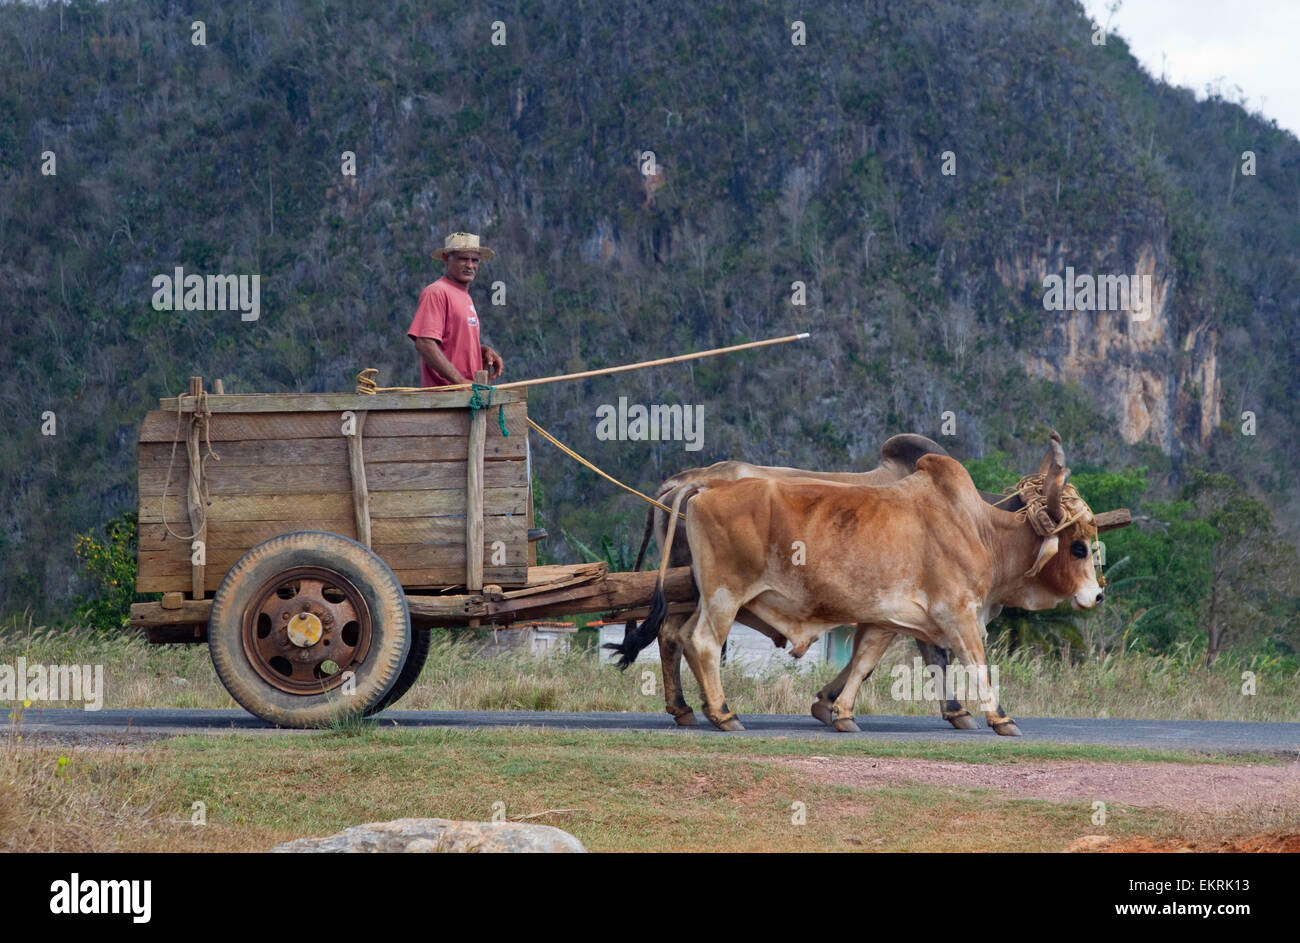 A farmer with two oxen and a cart in agricultural land in Vinales, Cuba with crops and tobacco plantations Stock Photo